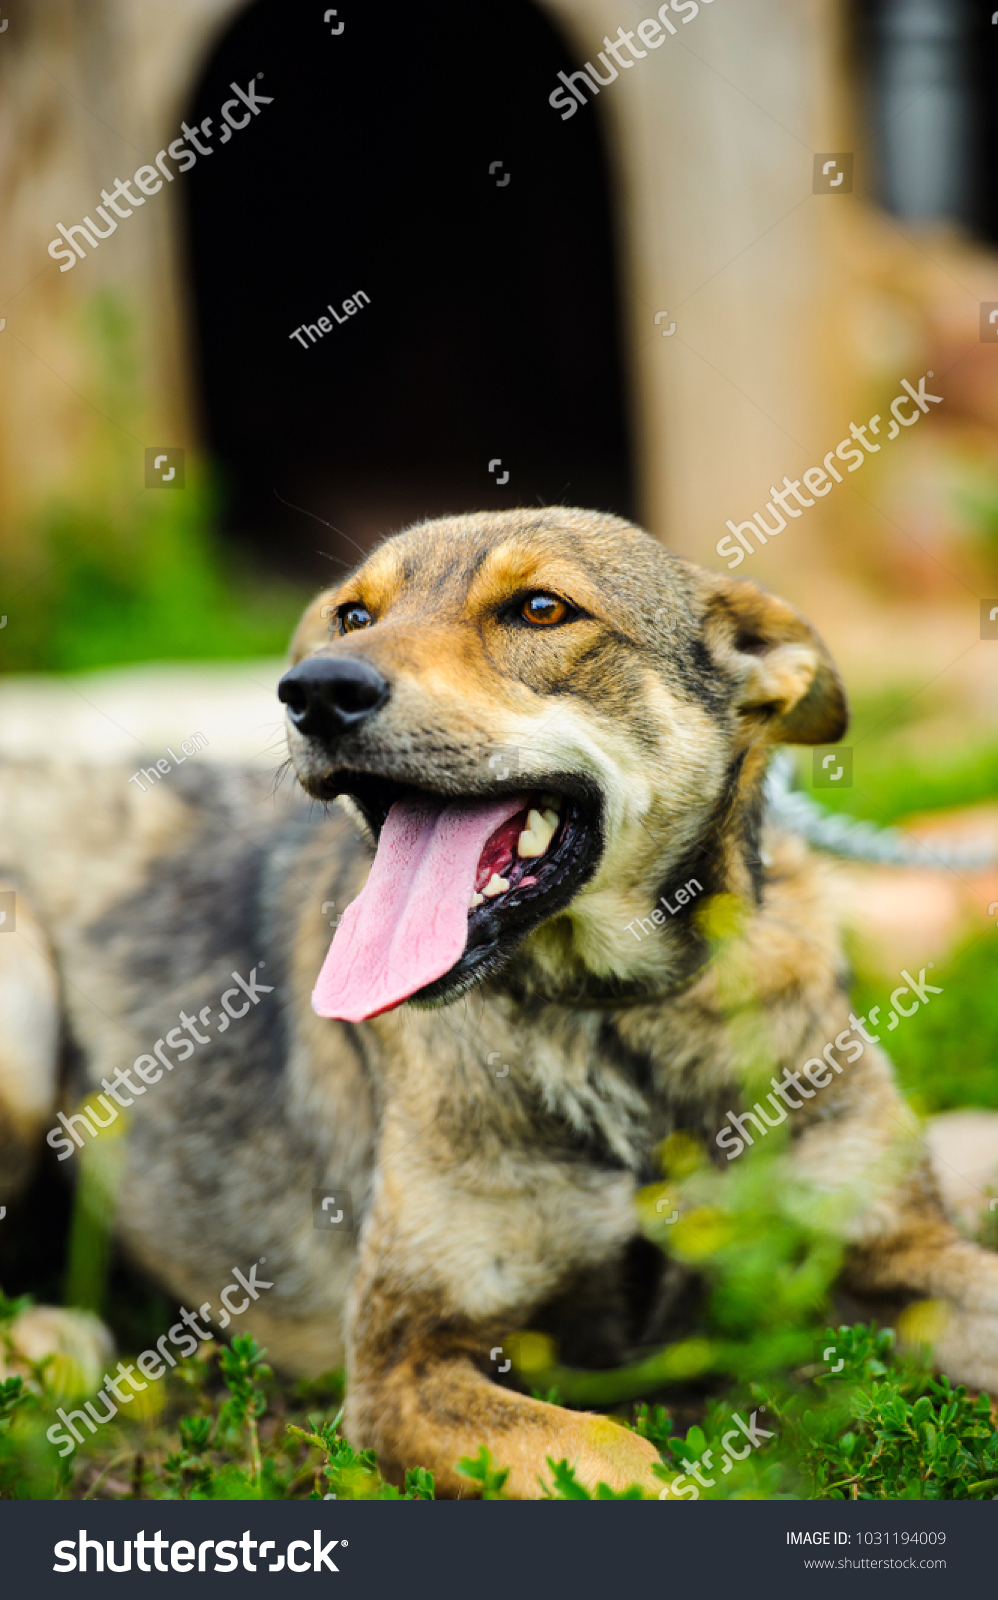 Angry Guard Dog Stock Photo (Edit Now) 1031194009